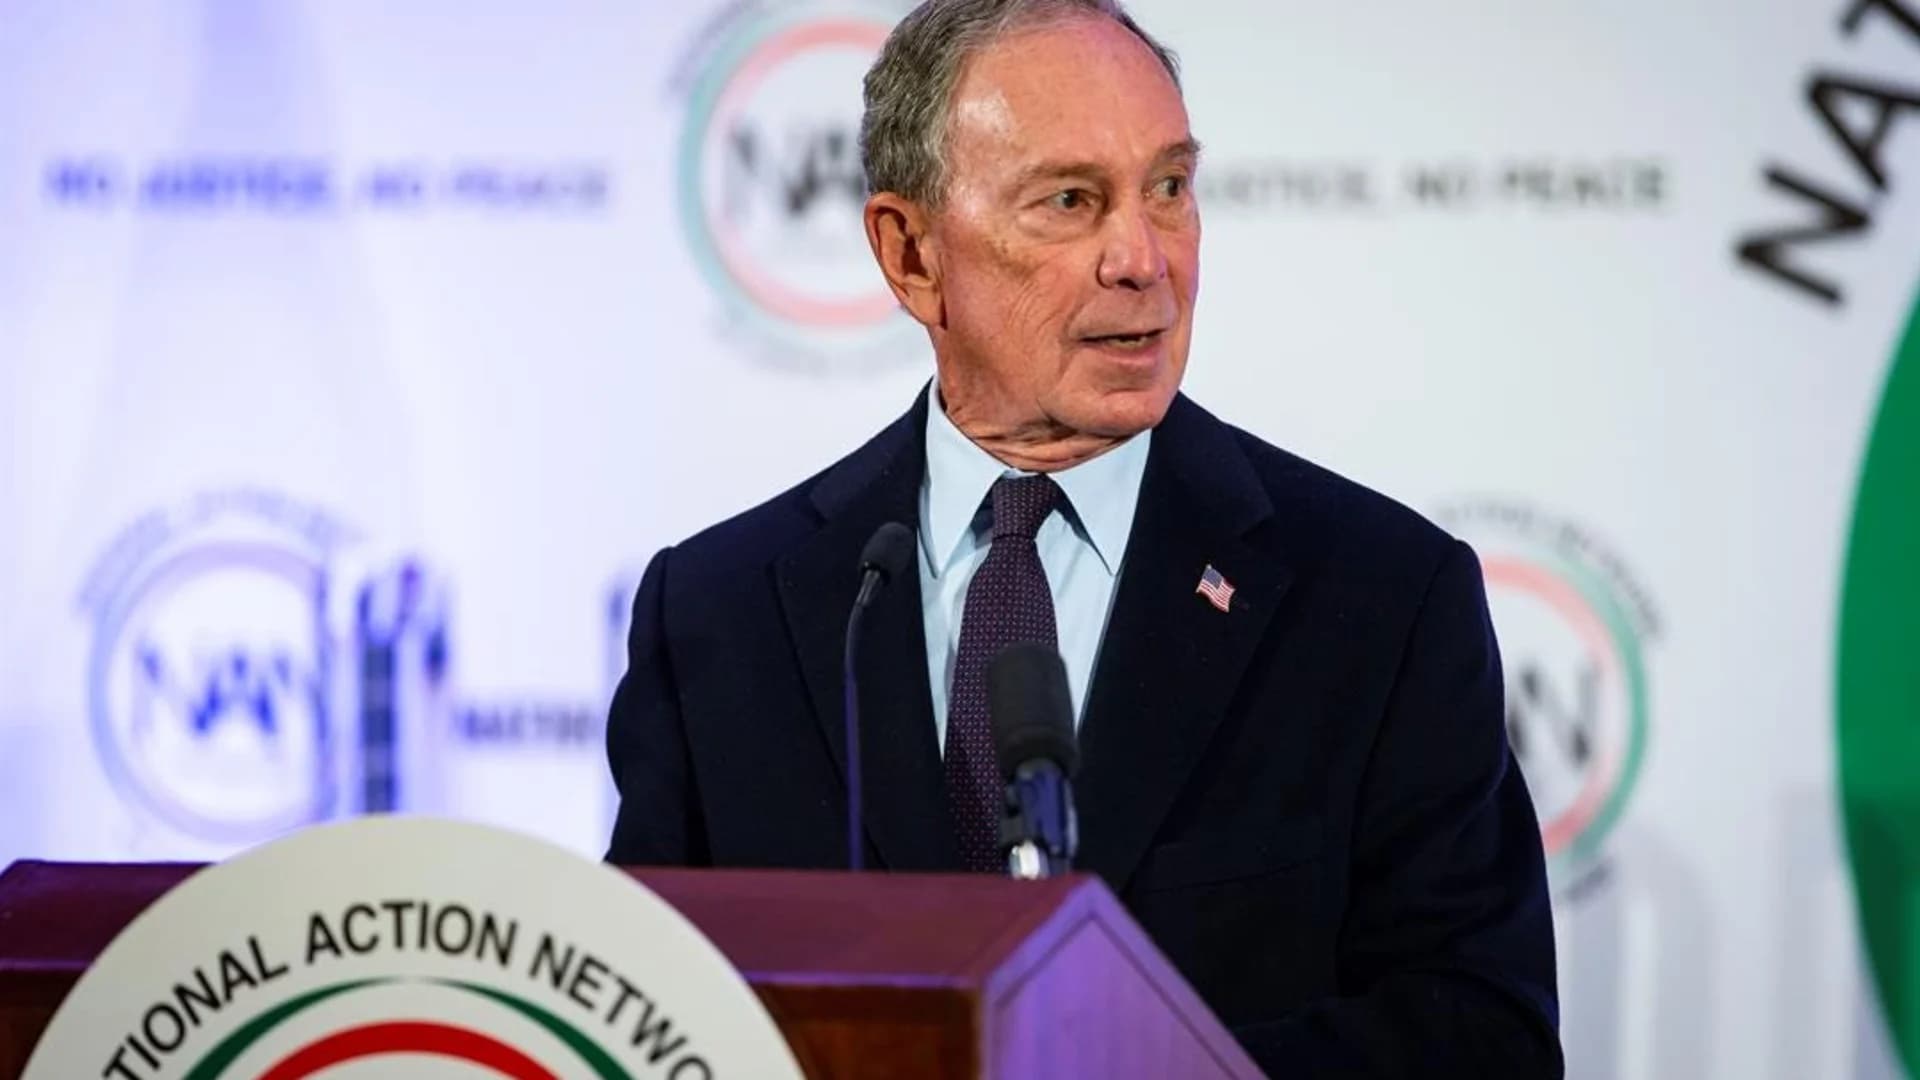 Ex-Mayor Bloomberg defends stop-and-frisk during speech